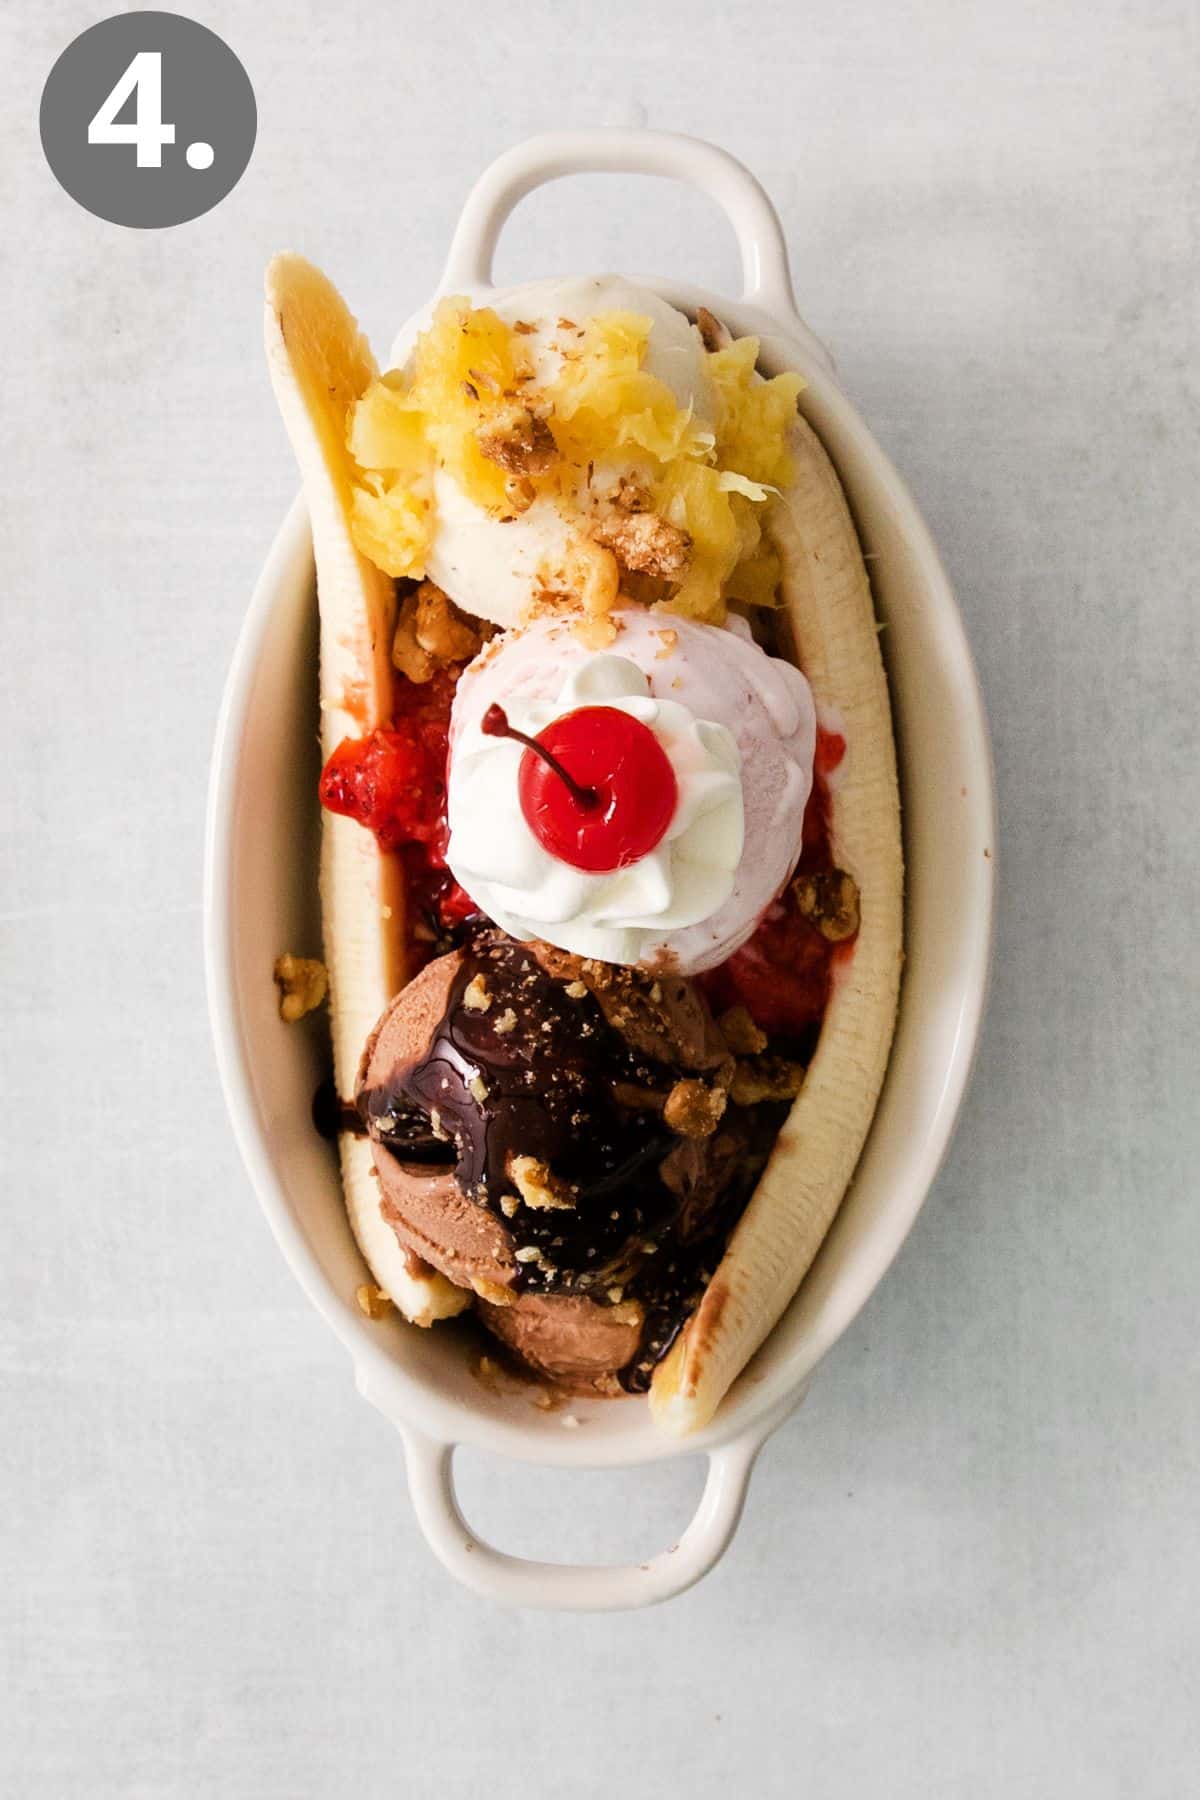 Banana split in a dish with a cherry on top